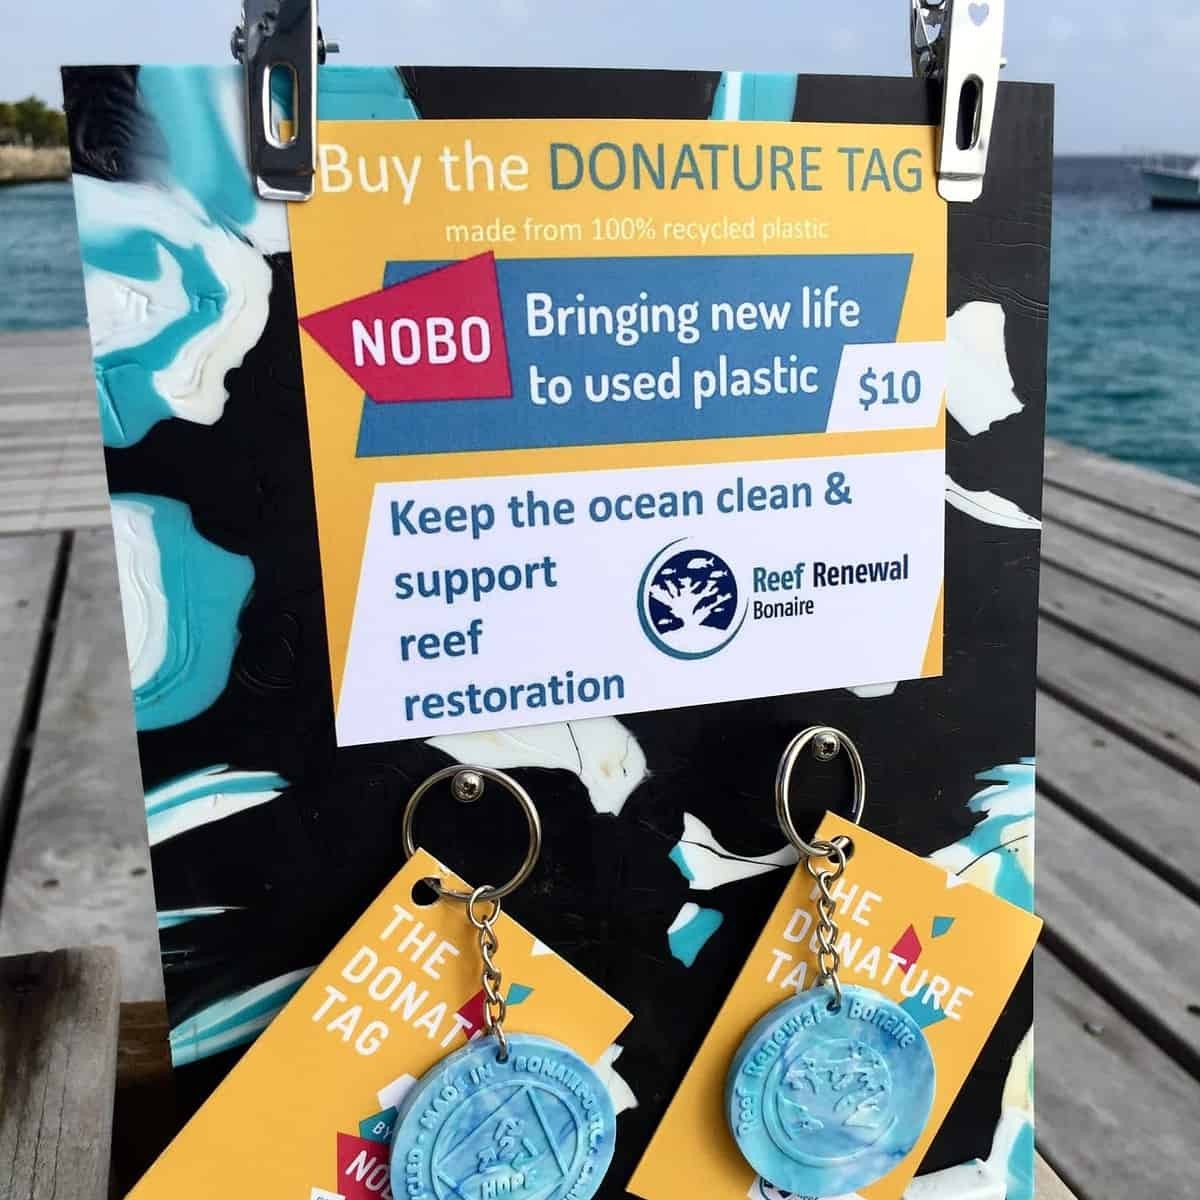 Reef Renewal Foundation Bonaire's new tag